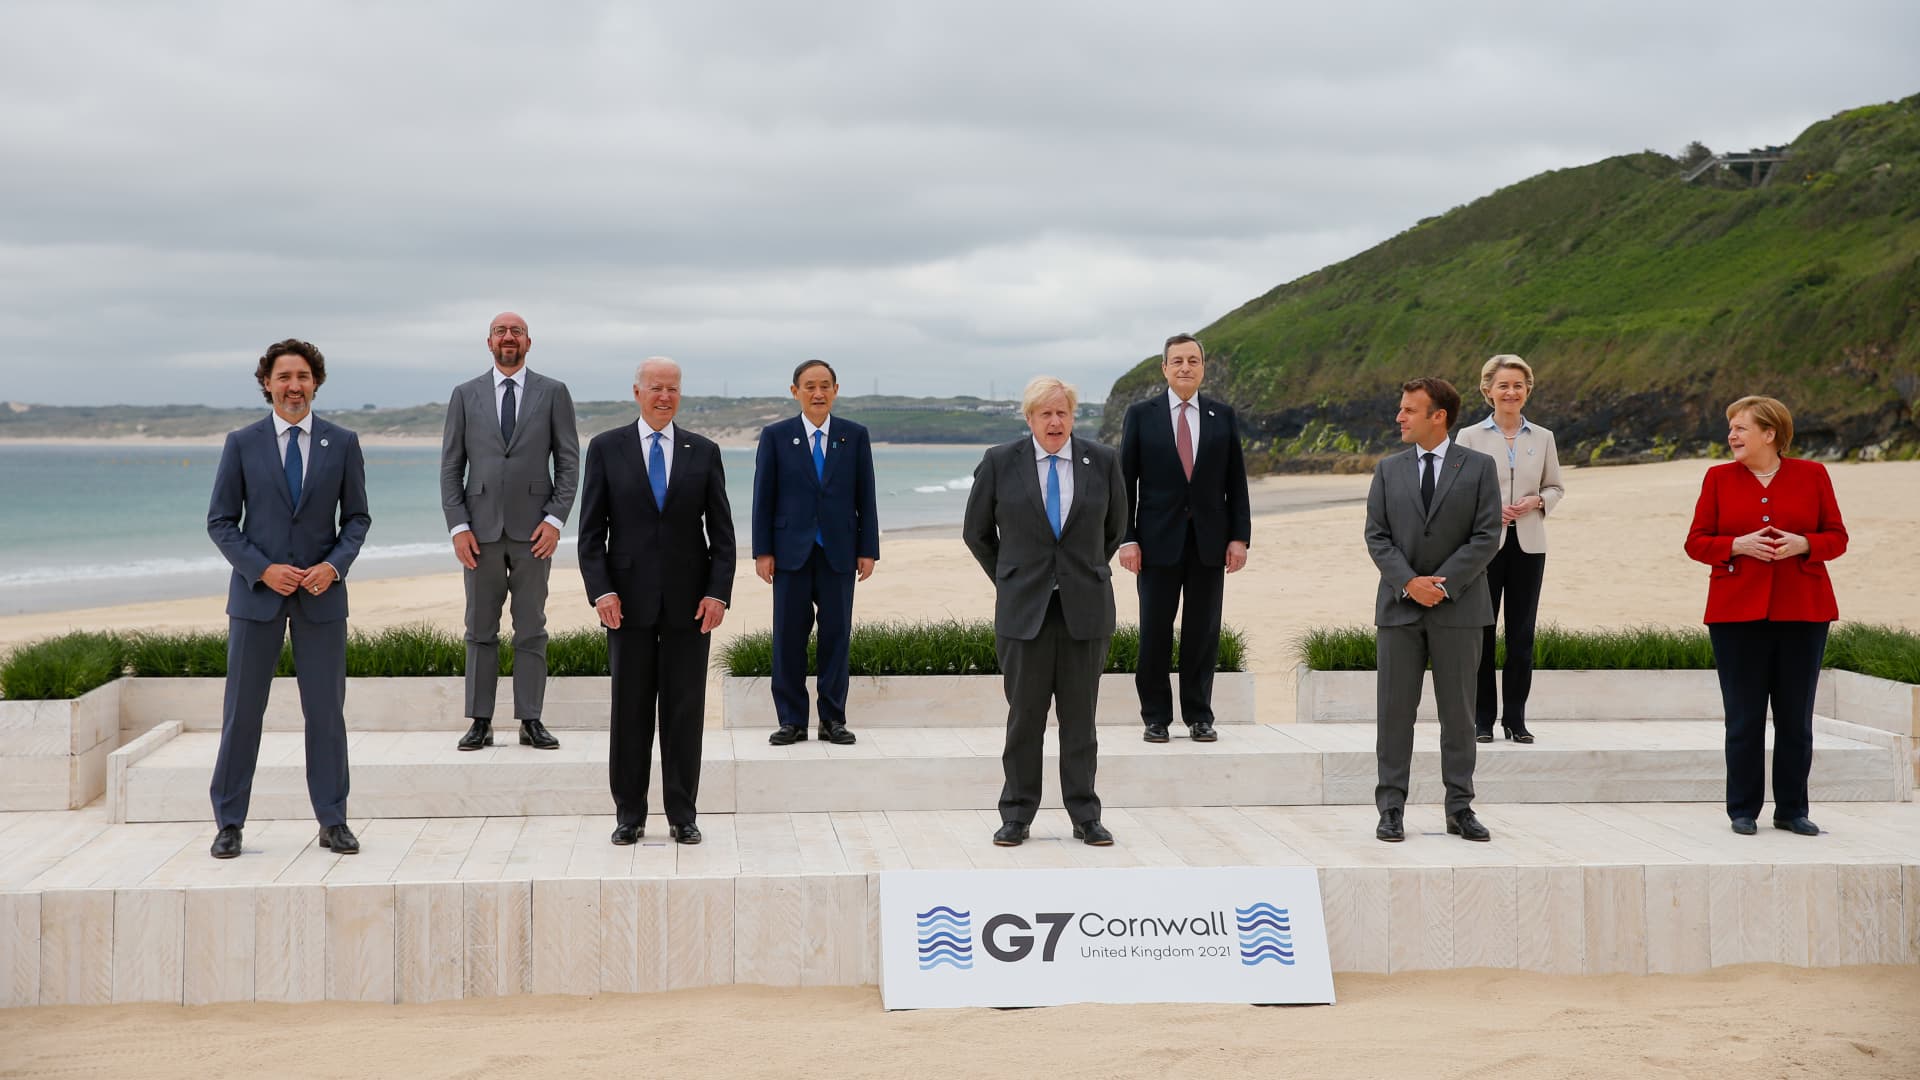 From left to right: Justin Trudeau, Canada's prime minister, Charles Michel, president of the European Council, U.S. President Joe Biden, Yoshihide Suga, Japan's prime minister, Boris Johnson, U.K. prime minister, Mario Draghi, Italy's prime minister, Emmanuel Macron, Frances president, Ursula von der Leyen, president of the European Commission, Angela Merkel, Germanys chancellor, during the family photo on the first day of the Group of Seven leaders summit in Carbis Bay, U.K., on Friday, June 11, 2021.